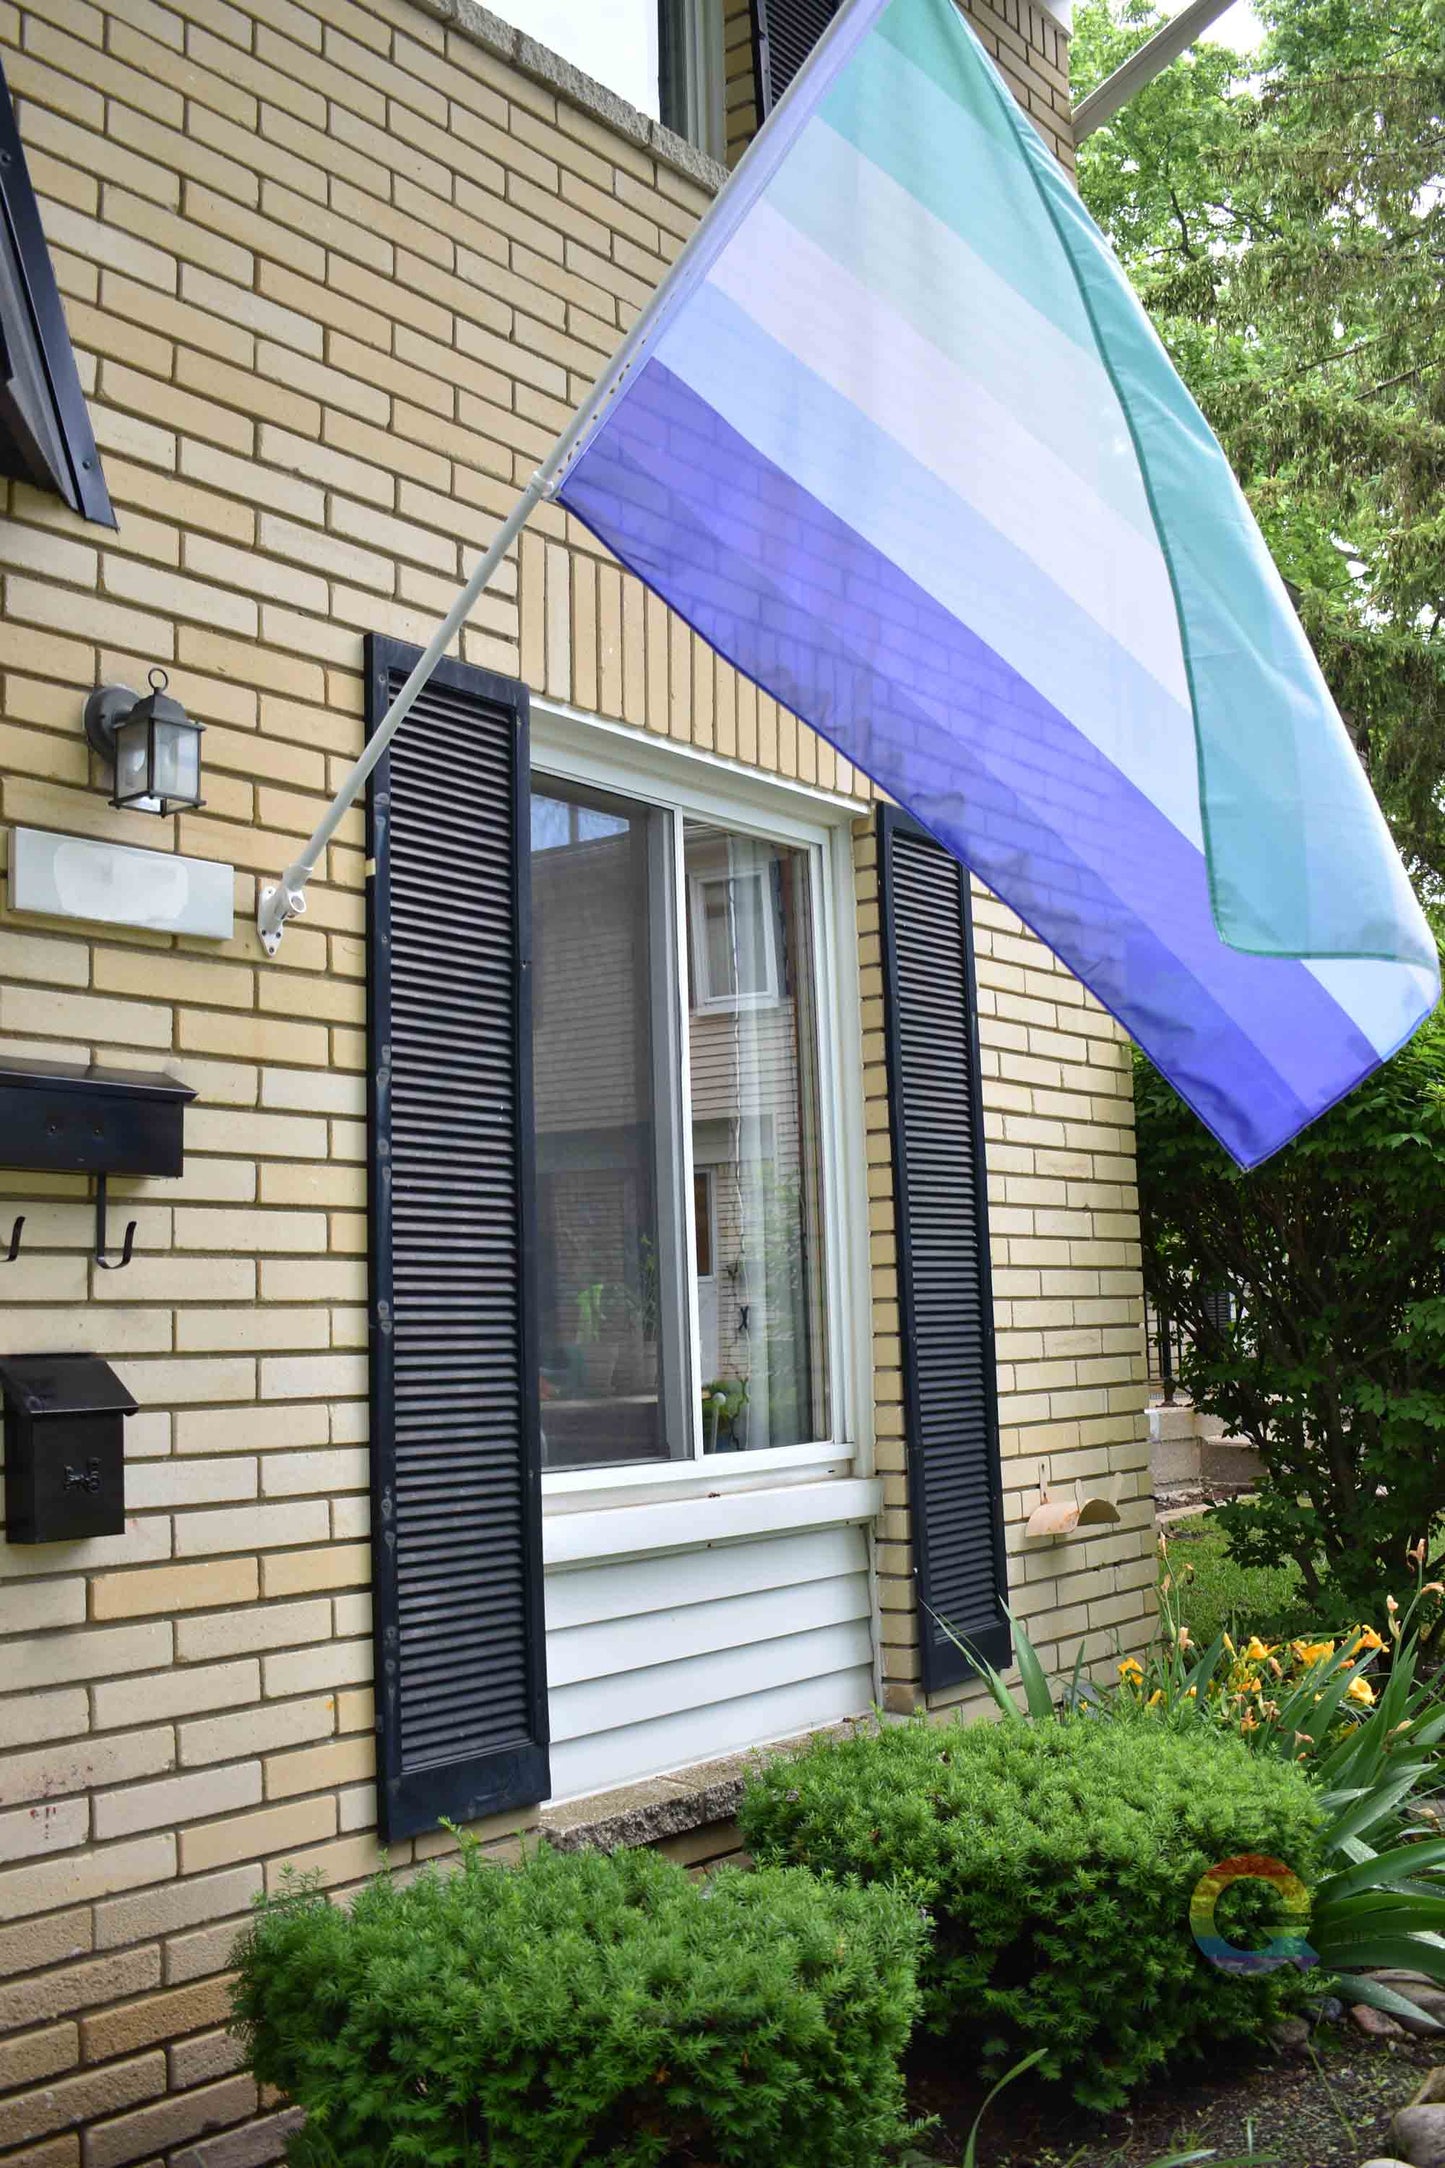 3’x5’ gay pride flag hanging from a flagpole on the outside of a light brick house with dark shutters